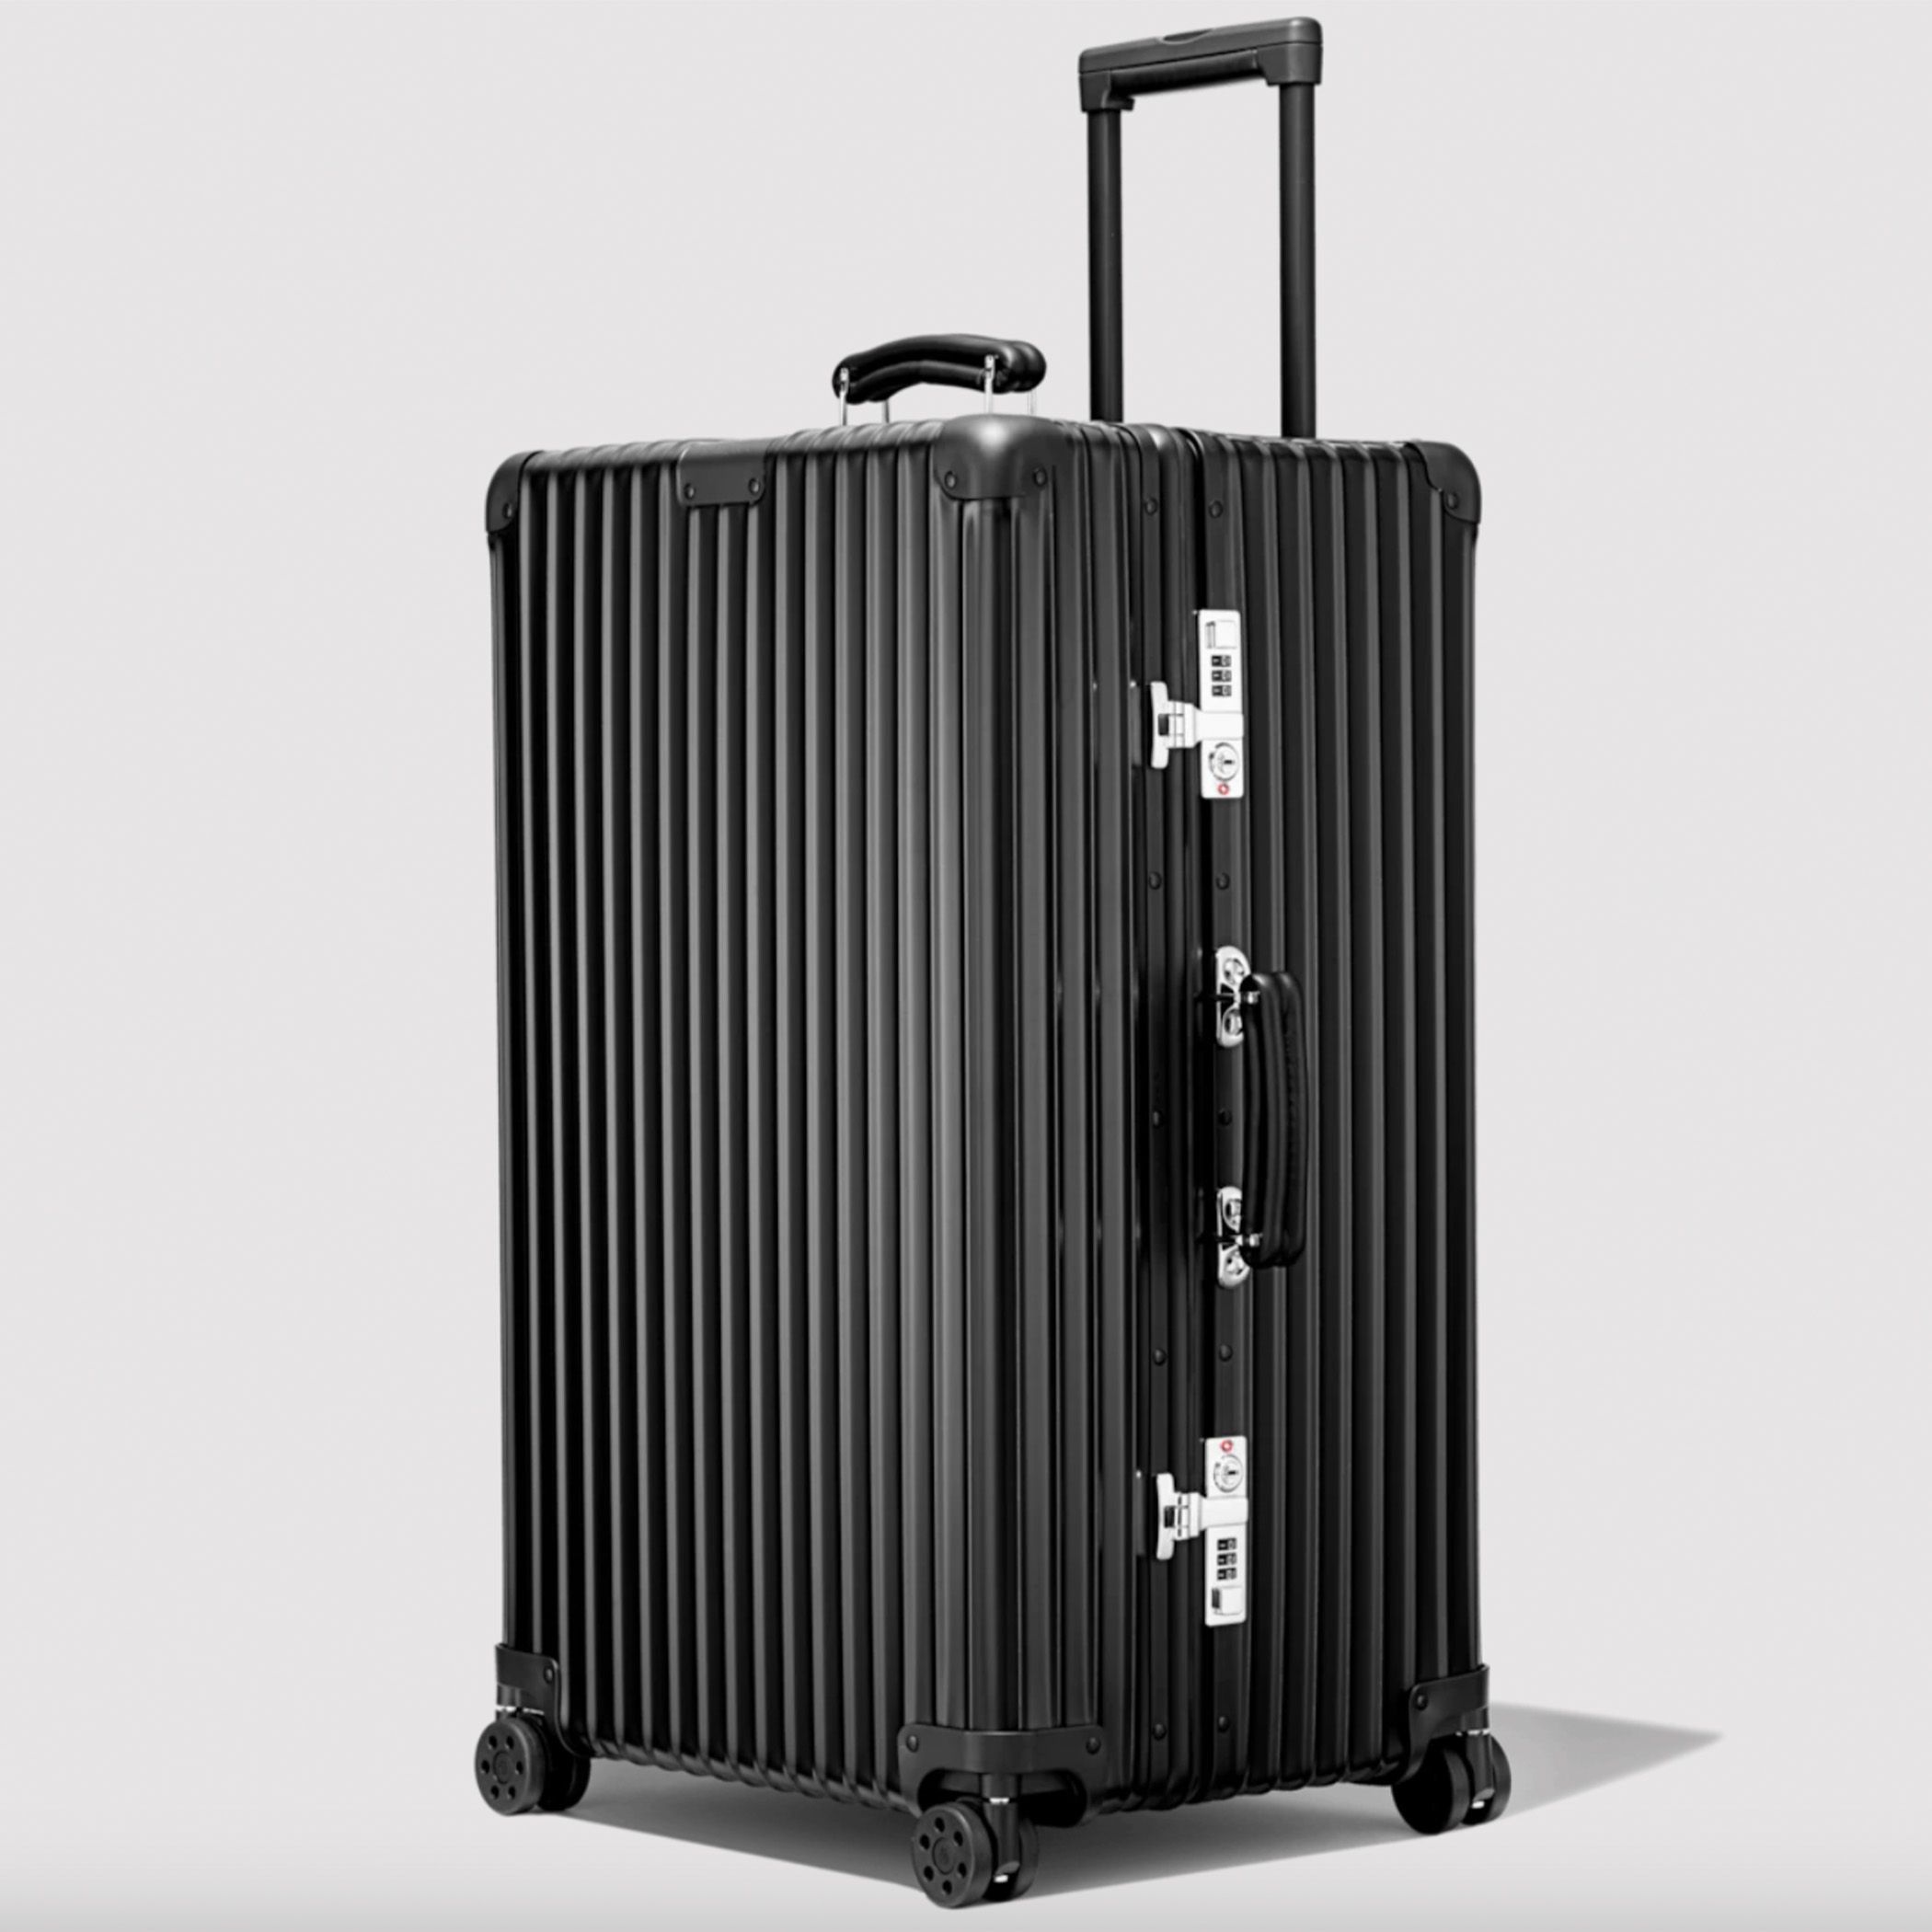 <p><strong>$2225.00</strong></p><p>If you're in the market for top-of-the-line hard-sided luggage, look no further than premium German luggage brand Rimowa. It's not cheap, but <em>Good Housekeeping</em> says its polycarbonate spinner "performed among the best in our testing based on its weight, packing space, durability, and maneuverability." Rimowa only makes hard-sided luggage, but with several collections ranging from the <a href="https://go.redirectingat.com?id=74968X1553576&url=https%3A%2F%2Fwww.rimowa.com%2Fus%2Fen%2Fessential-lite%2F&sref=https%3A%2F%2Fwww.roadandtrack.com%2Fgear%2Flifestyle%2Fg44130437%2Fbest-luggage-brands%2F">Essential Lite</a> to the <a href="https://go.redirectingat.com?id=74968X1553576&url=https%3A%2F%2Fwww.rimowa.com%2Fus%2Fen%2Fluggage%2Fcollection%2Foriginal%2Fcabin%2F92553004.html&sref=https%3A%2F%2Fwww.roadandtrack.com%2Fgear%2Flifestyle%2Fg44130437%2Fbest-luggage-brands%2F">Original</a>, which is made of durable aluminum and has "clever packing compartments," there's something here for every discerning traveler.</p><p>We love the foot-locker aesthetic of the <strong>Classic Trunk</strong>. It comes in silver or matte black and is made from anodized aluminum alloy, with riveted matte black aluminum corners and handmade leather handles. All Rimowa luggage comes with a lifetime guarantee. </p><a class="body-btn-link" href="https://www.amazon.com/rimowa-luggage/s?k=rimowa+luggage&tag=syndication-20&ascsubtag=%5Bartid%7C10064.g.44130437%5Bsrc%7Cmsn-us">buy rimowa at amazon</a>